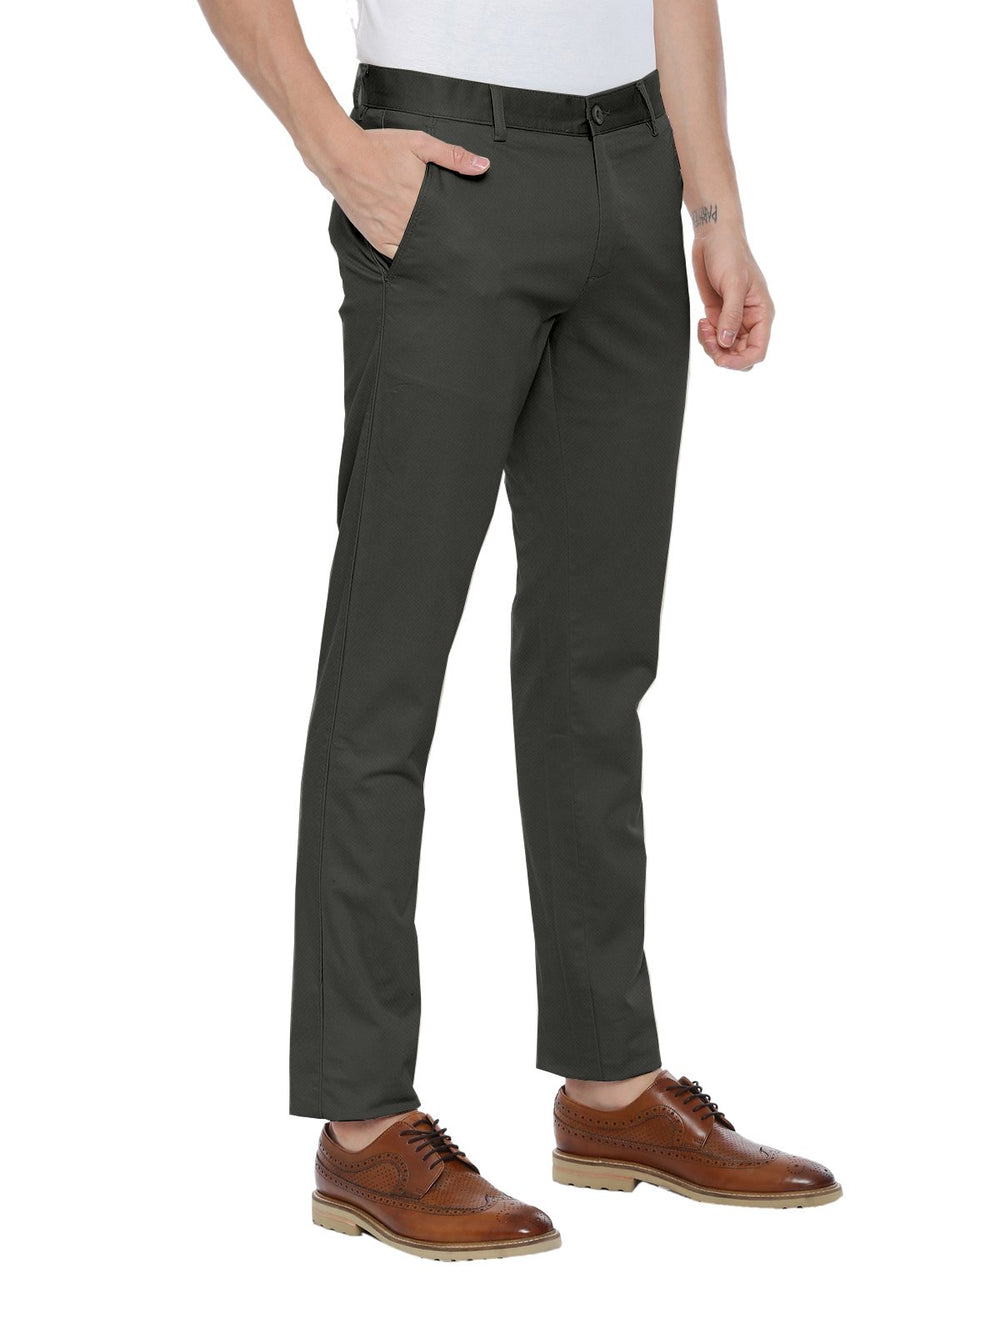 Brooklyn - Steel Gray Cotton Lycra Trousers TR19004 – Uathayam